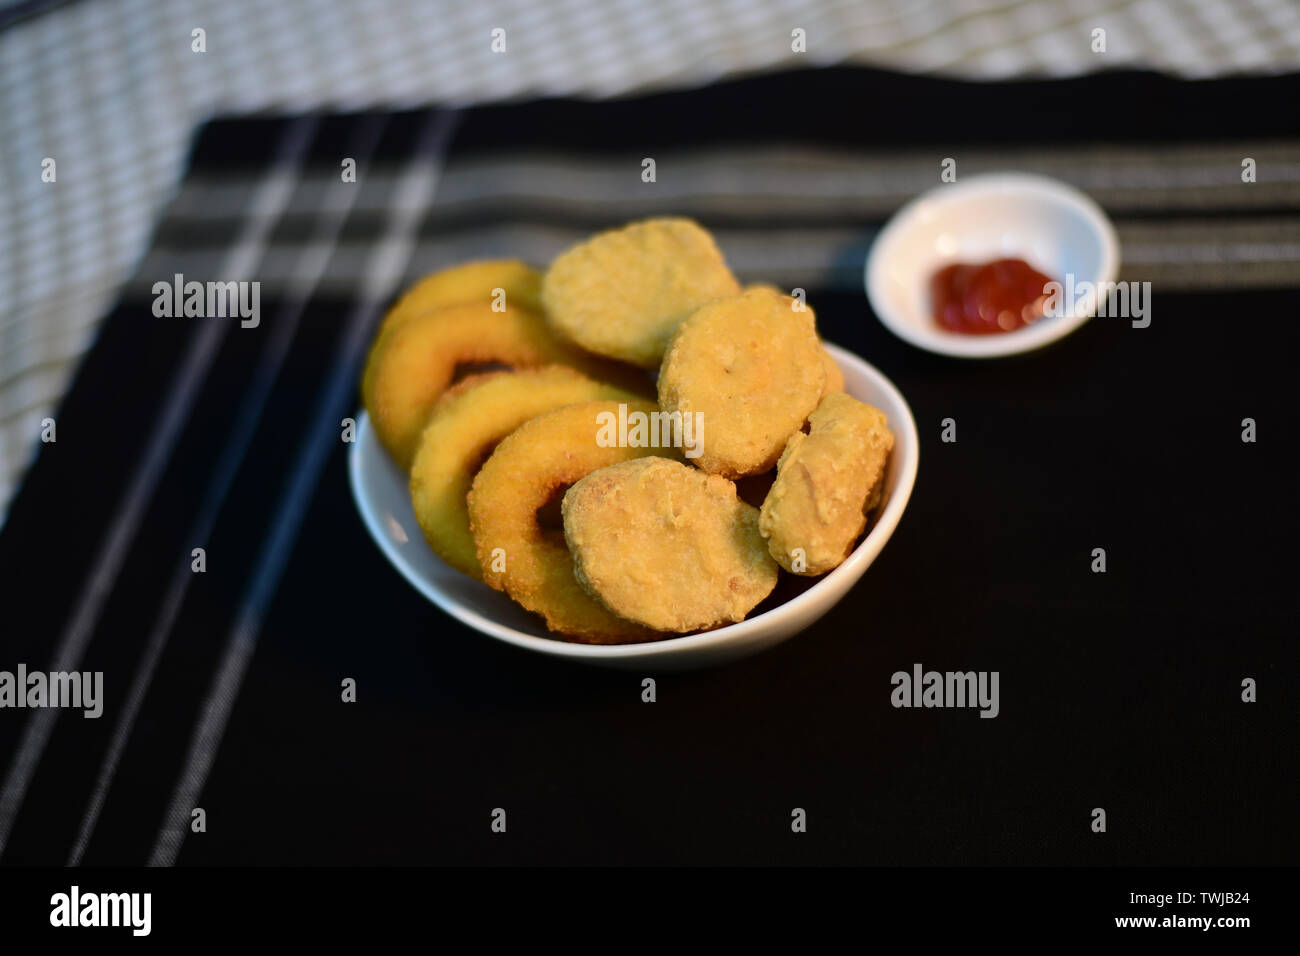 chicken nuggets, setup nicely on table ready to serve Stock Photo